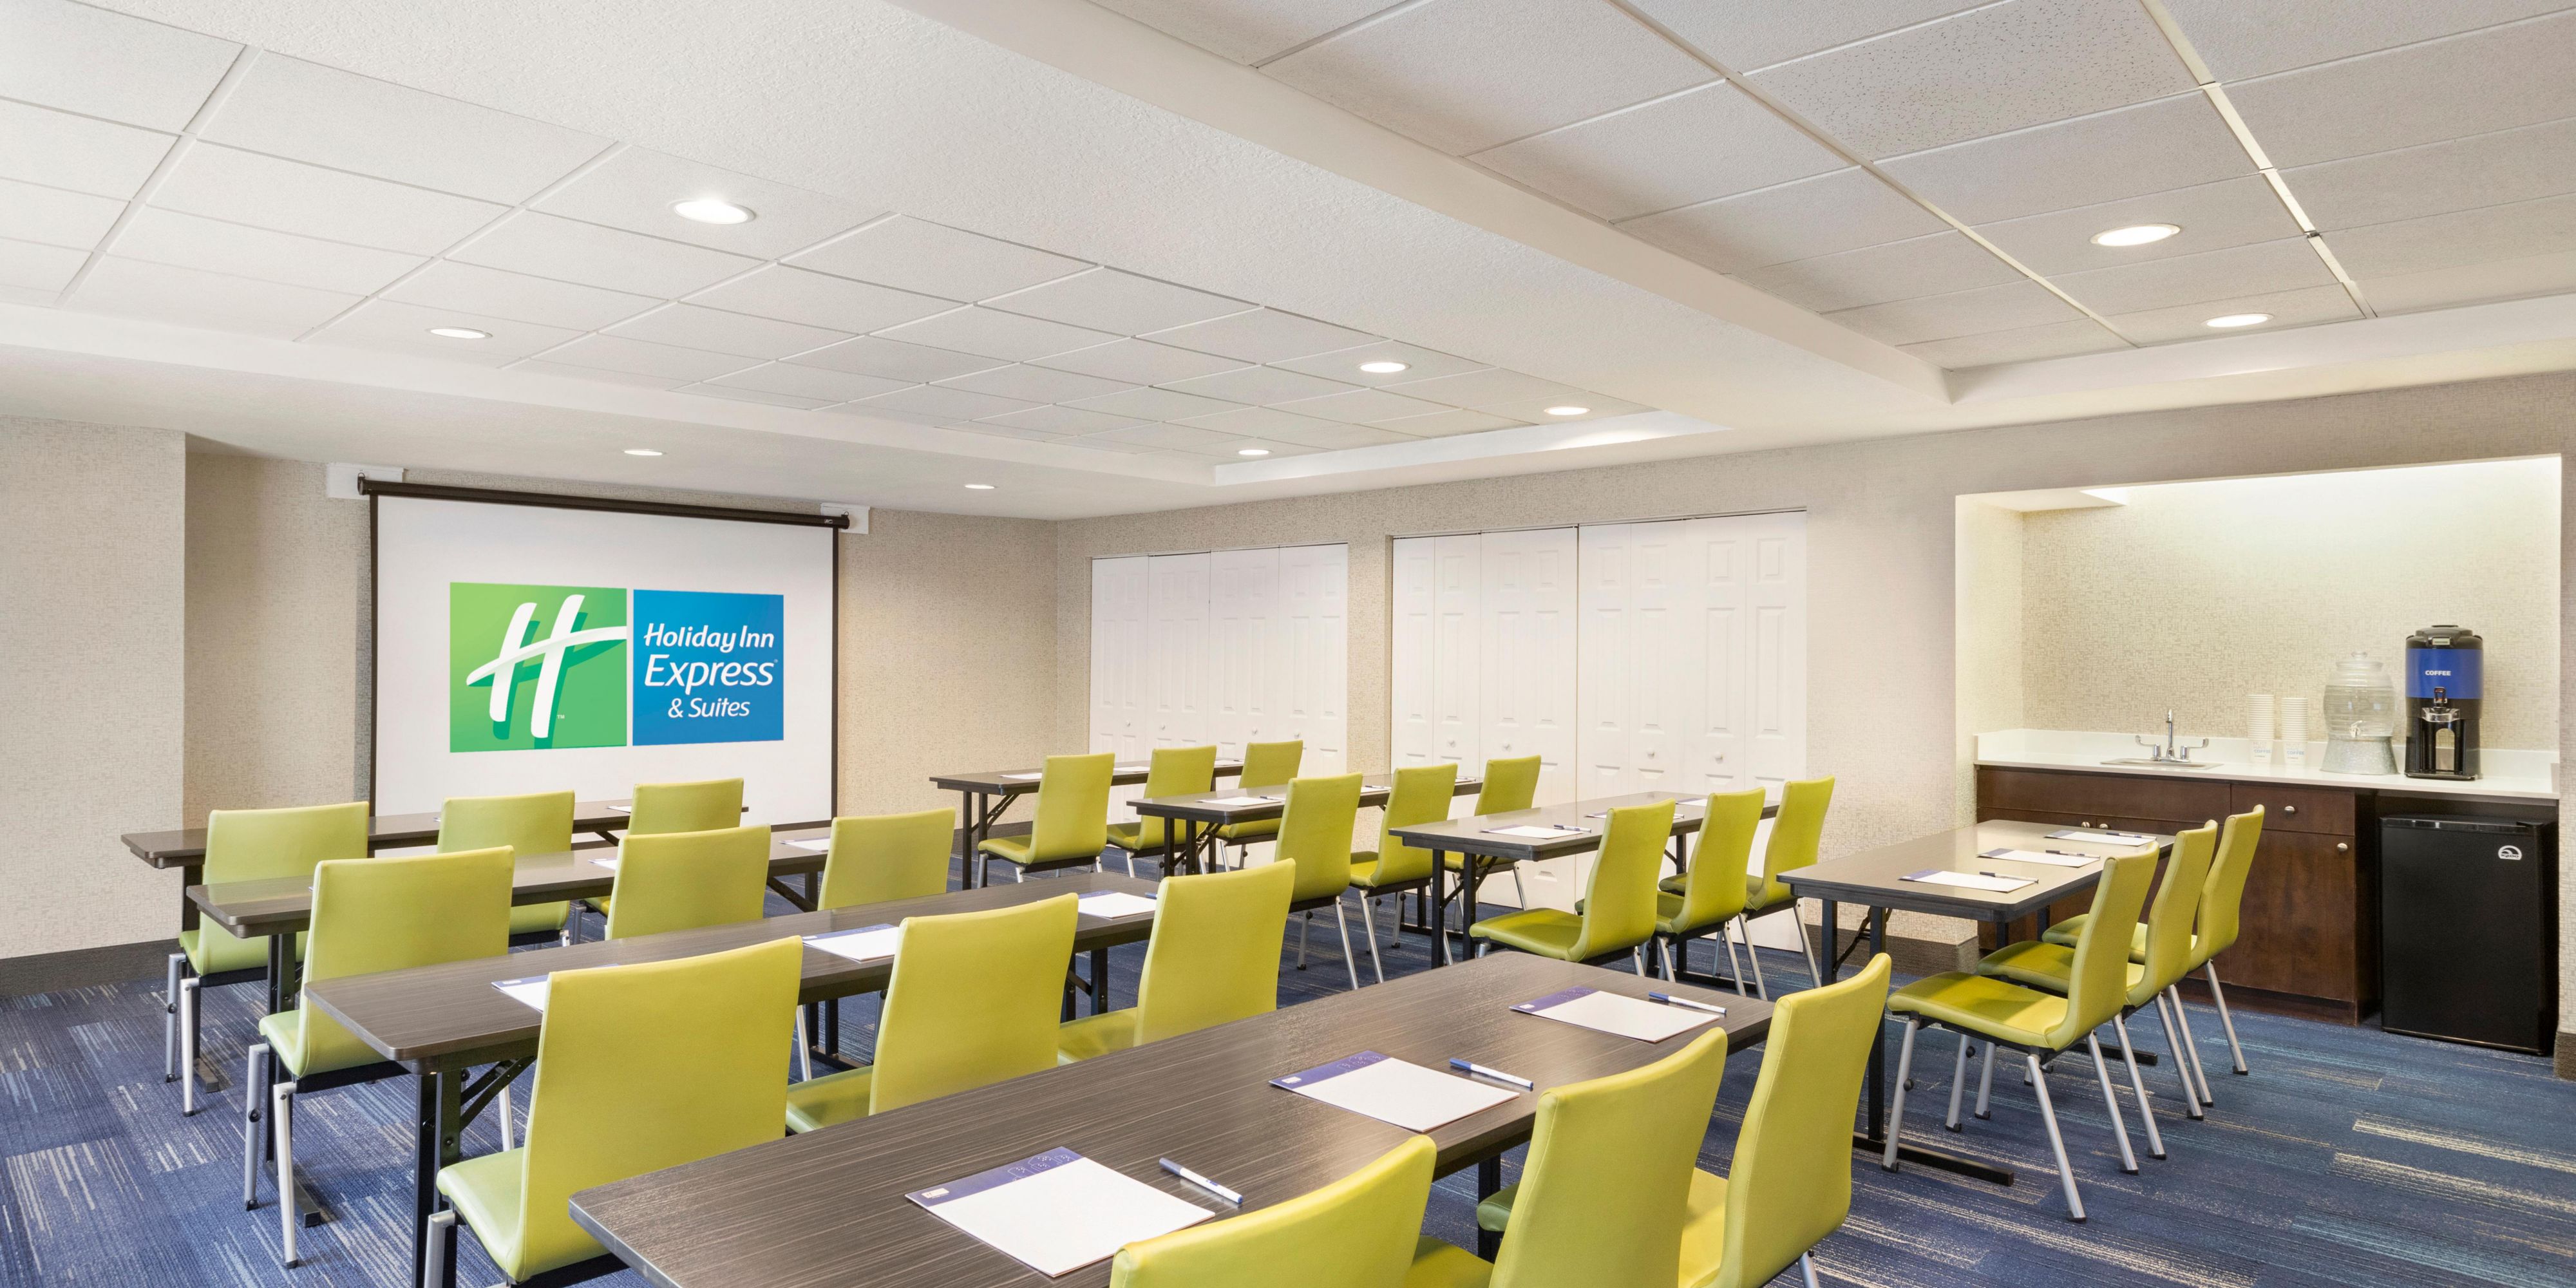 Host a formal business meeting in our small-scale meeting space which can accommodate 12 in a banquet-style setting, 40 in a U-shape setup, 70 in a theatre-style setup, and 25 in a banquet-style setup. Meeting packages are available.